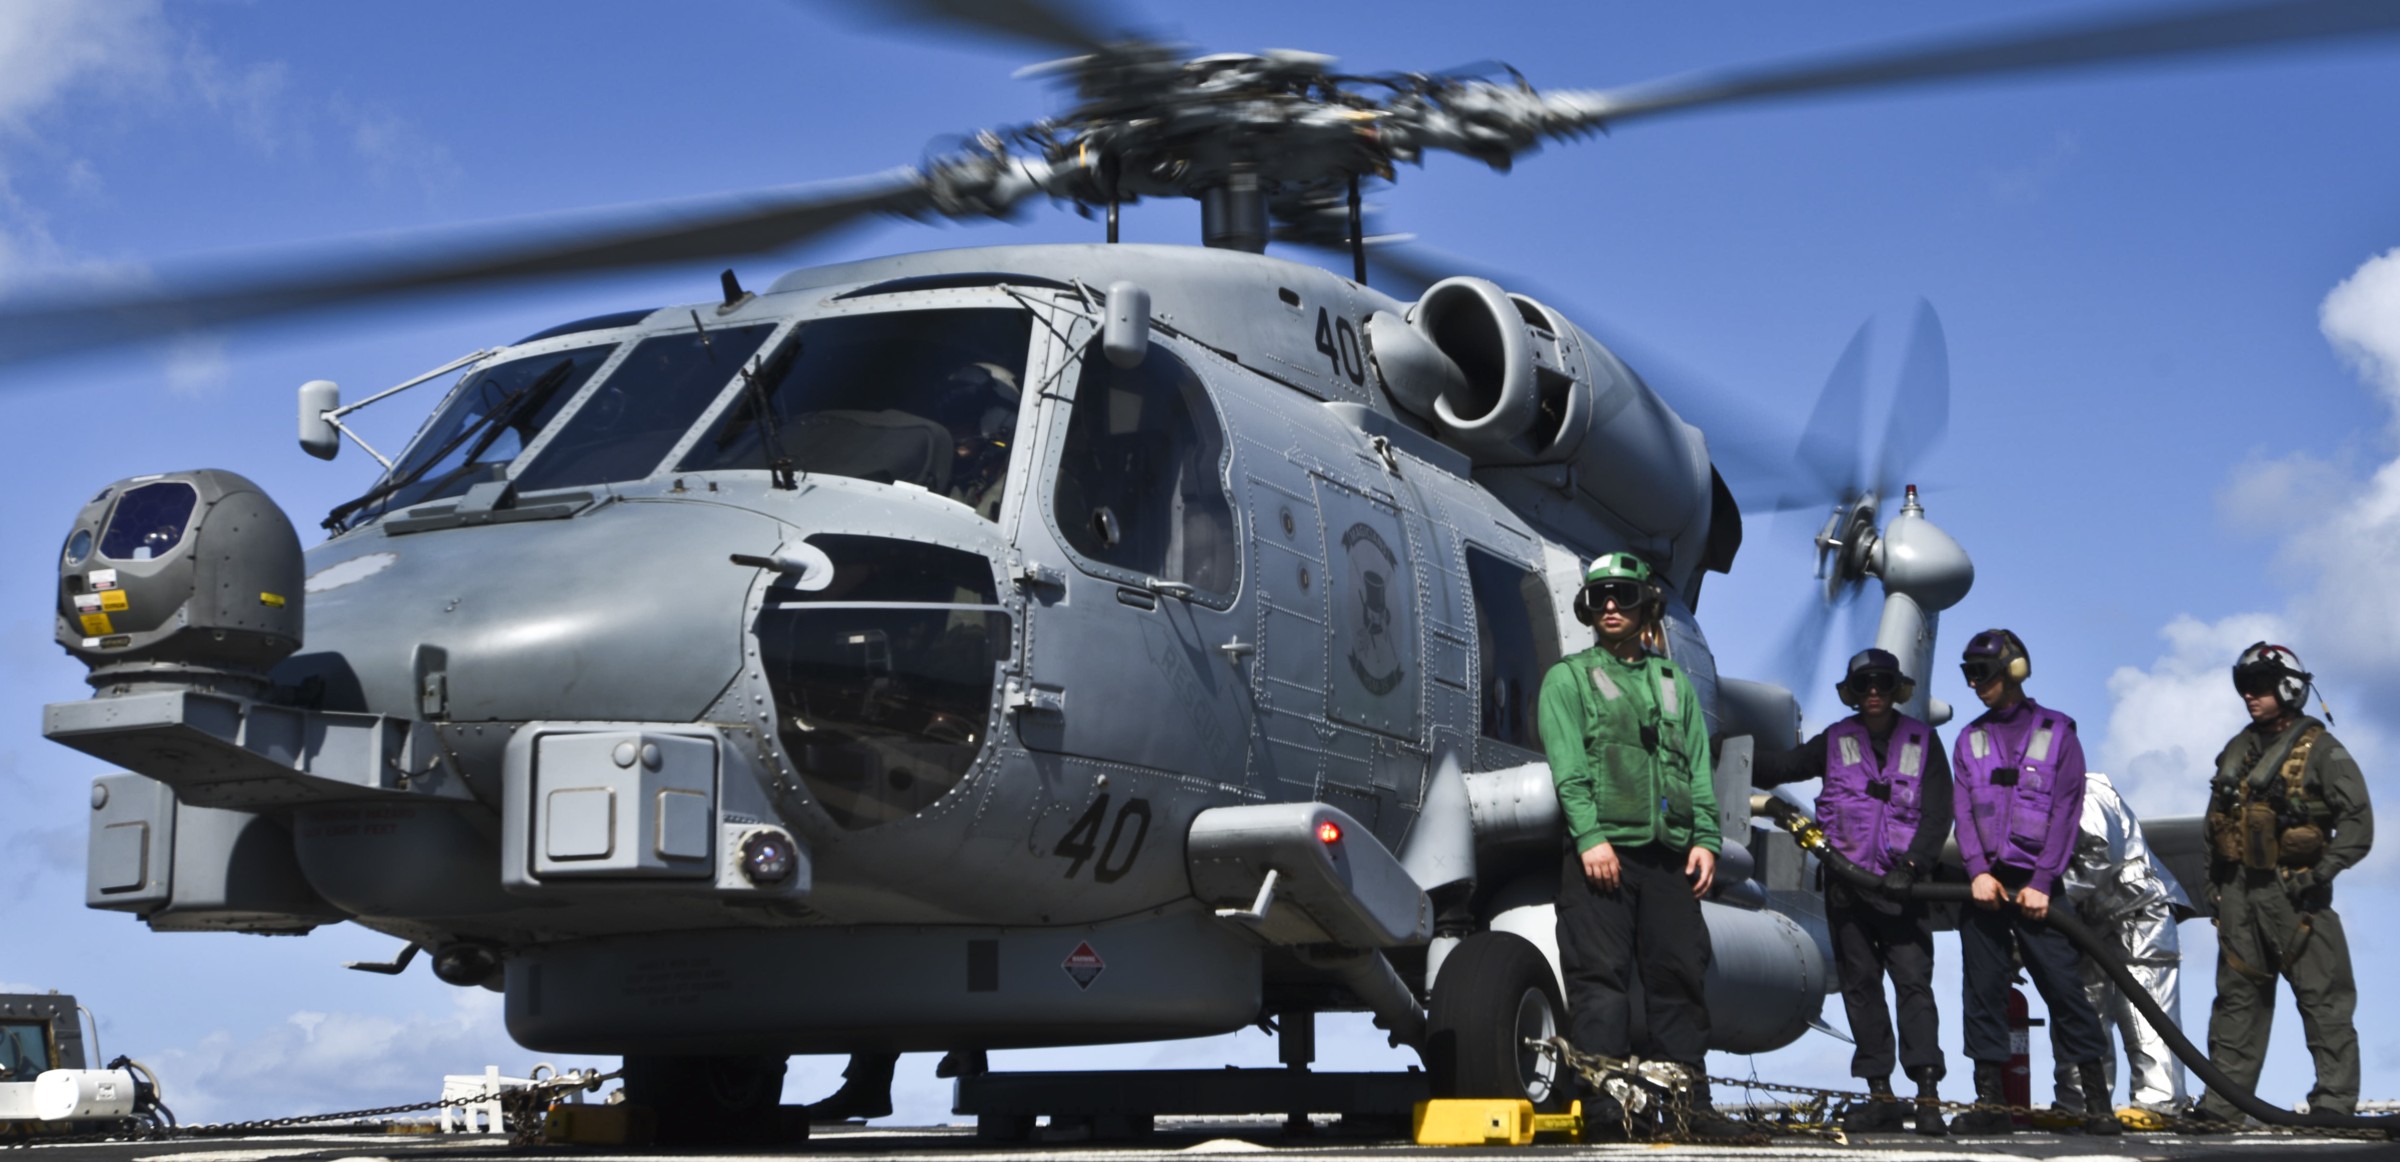 hsm-35 magicians helicopter maritime strike squadron us navy mh-60r seahawk 39